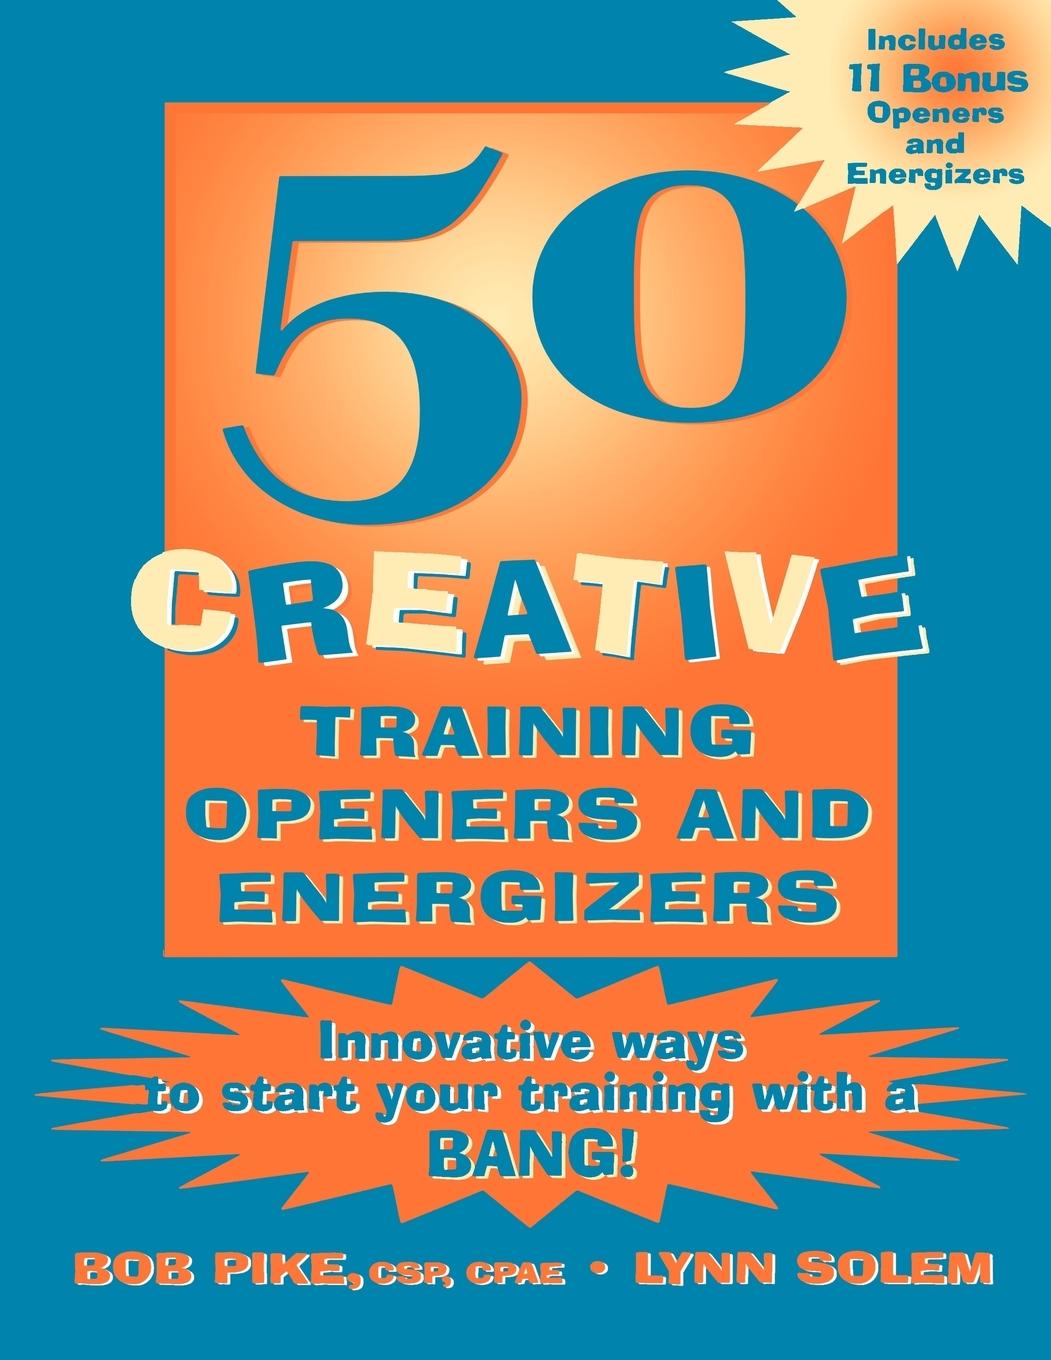 50 Creative Training Openers and Energizers - Pike, Bob Betsy Pike, Robert W.